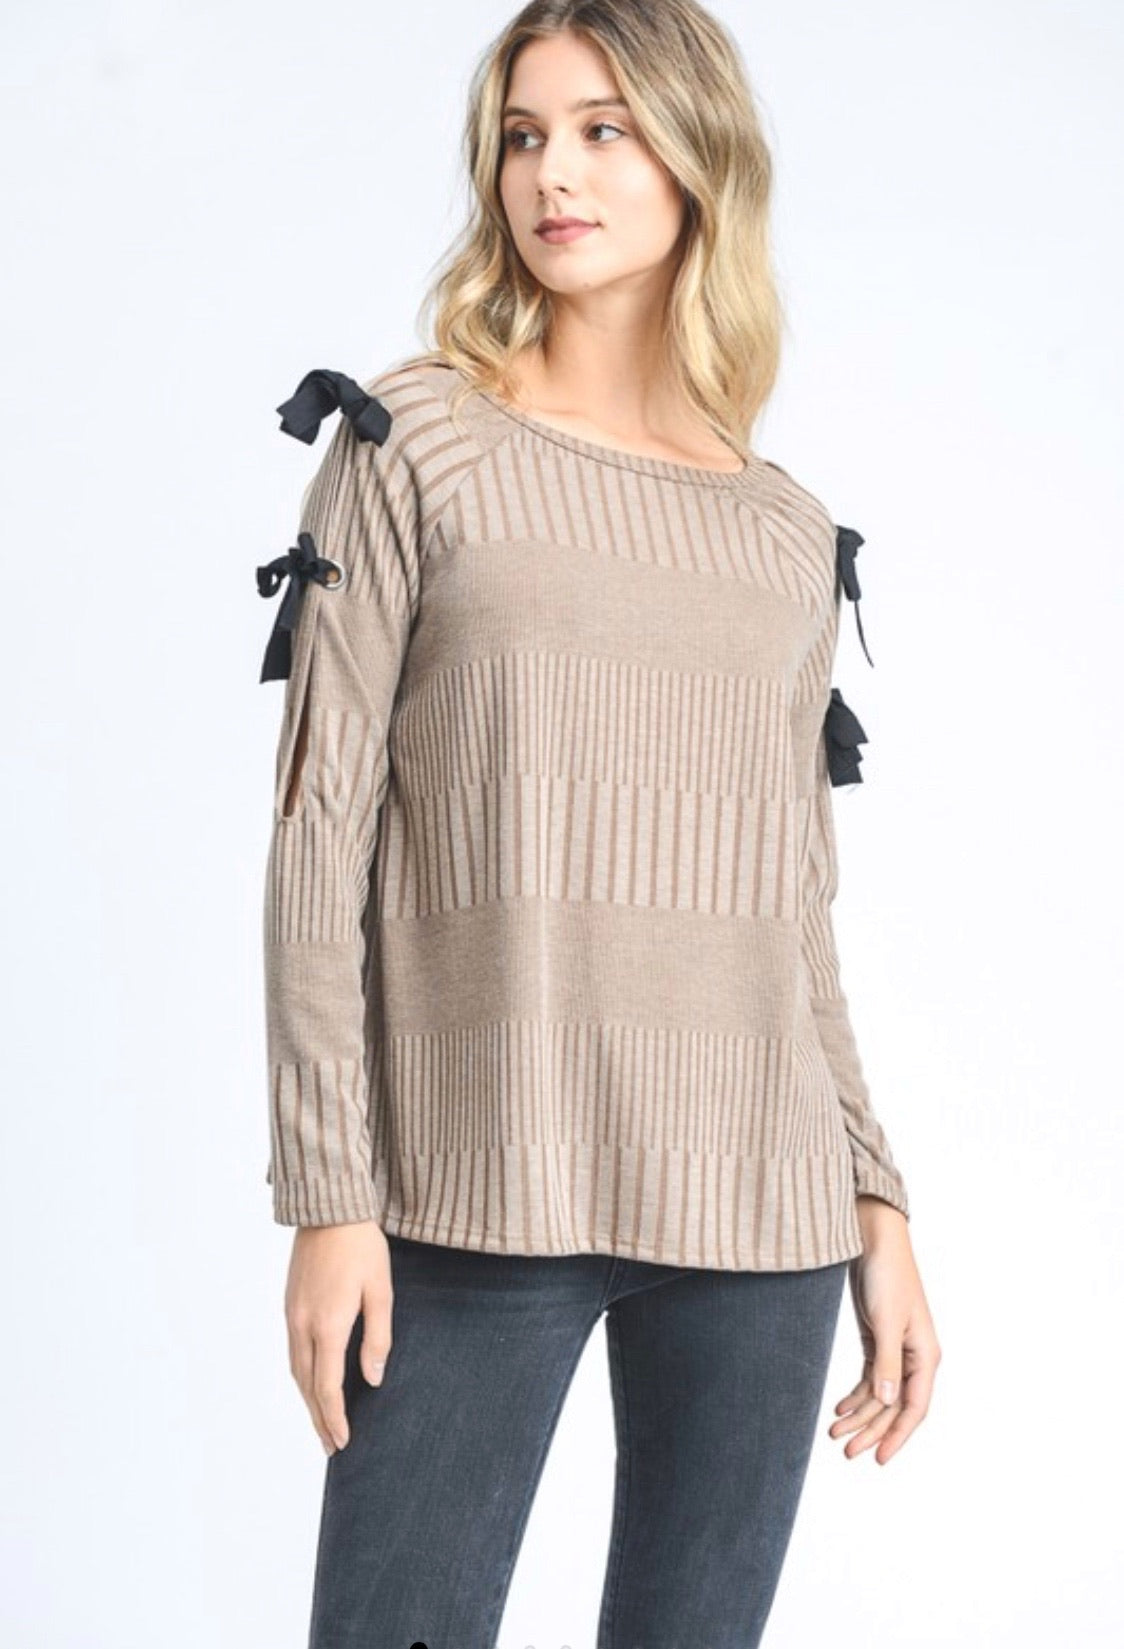 Taupe Long Sleeved Top w/ Bow Details